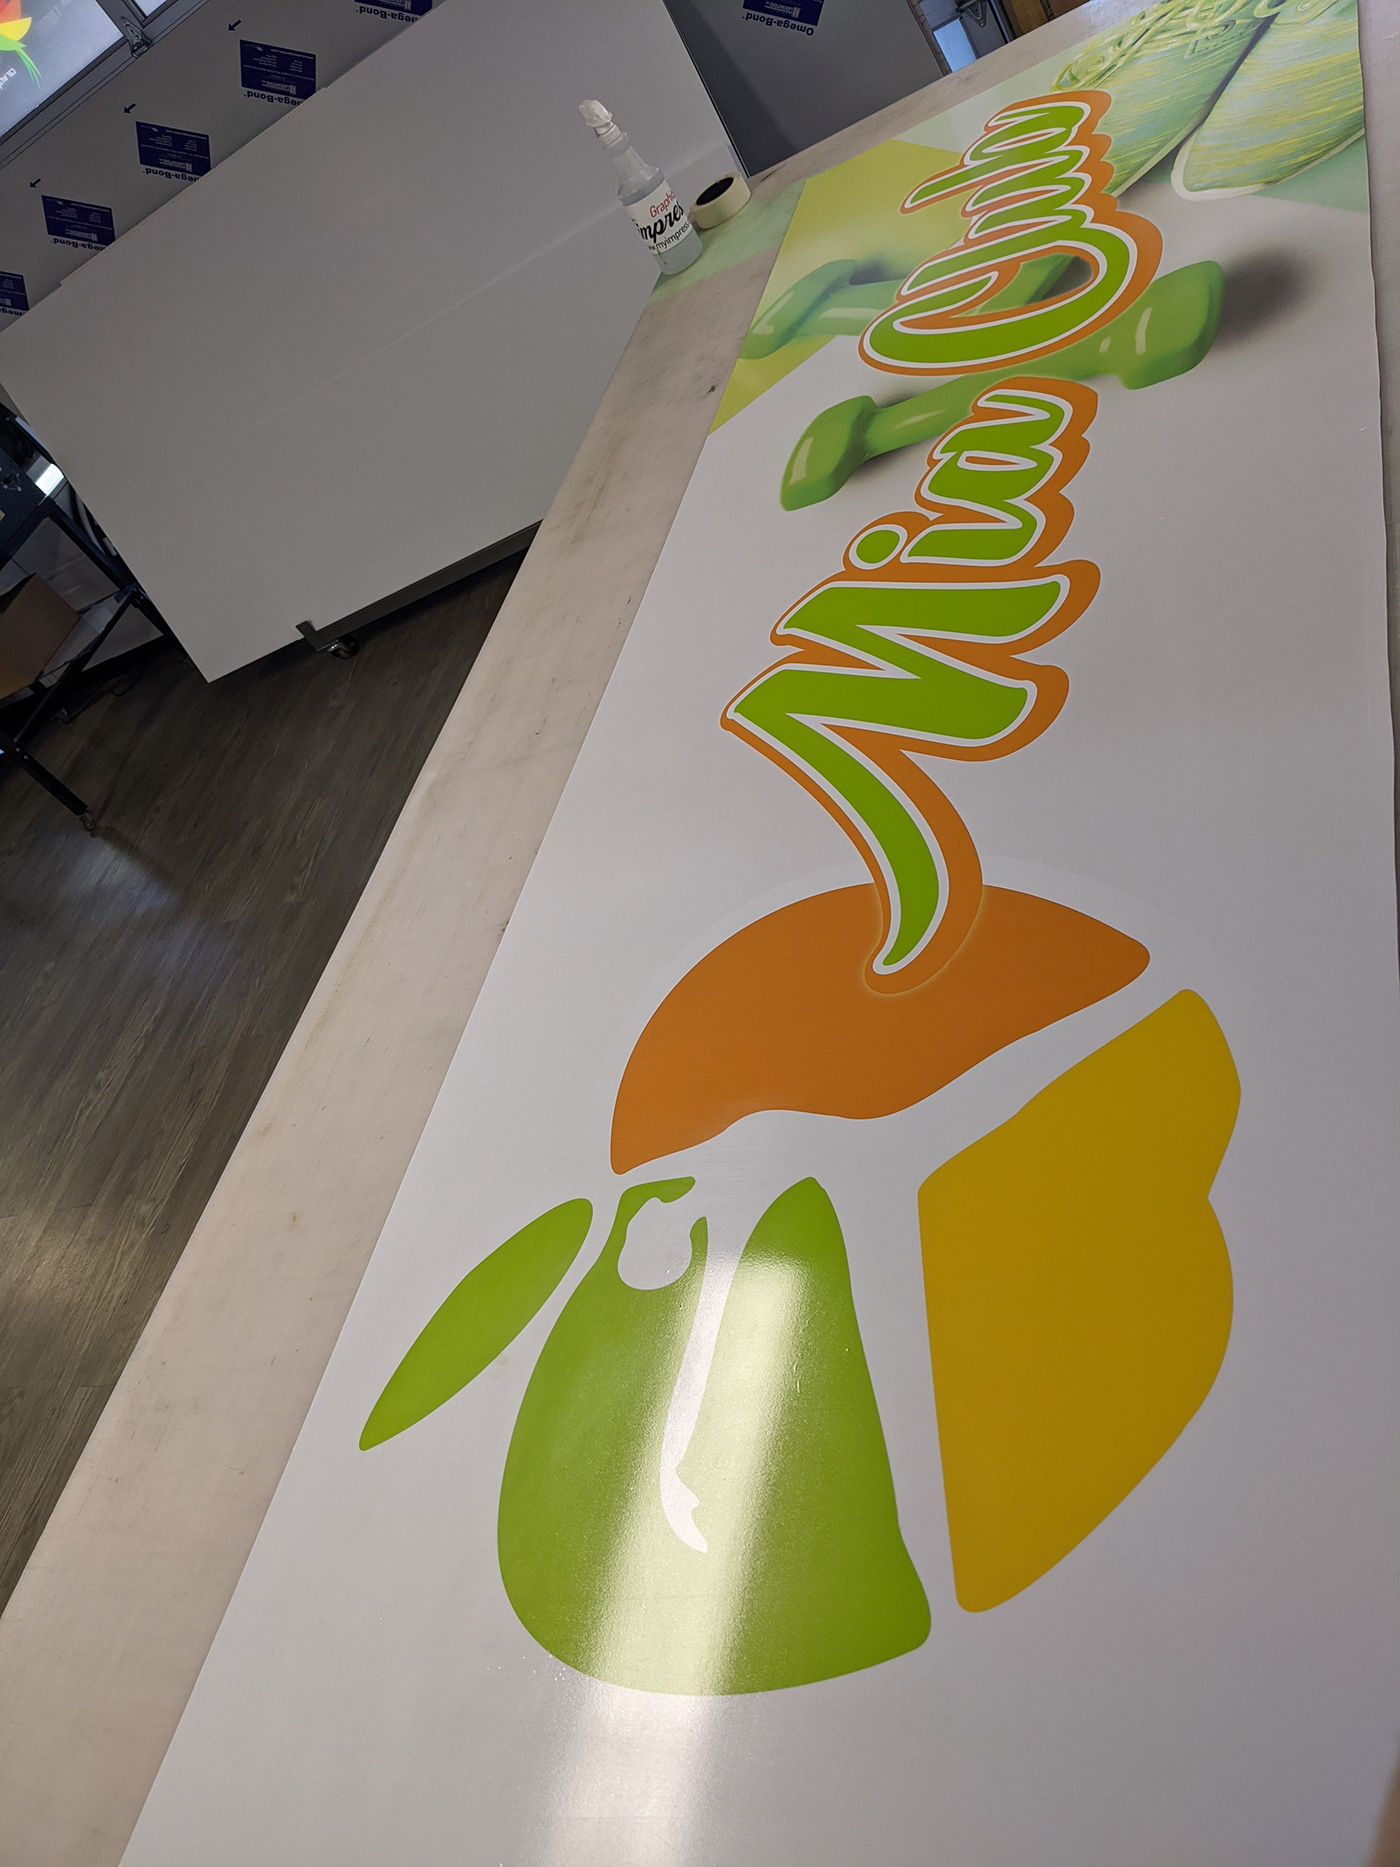 AMC artwork banners business signs substrate